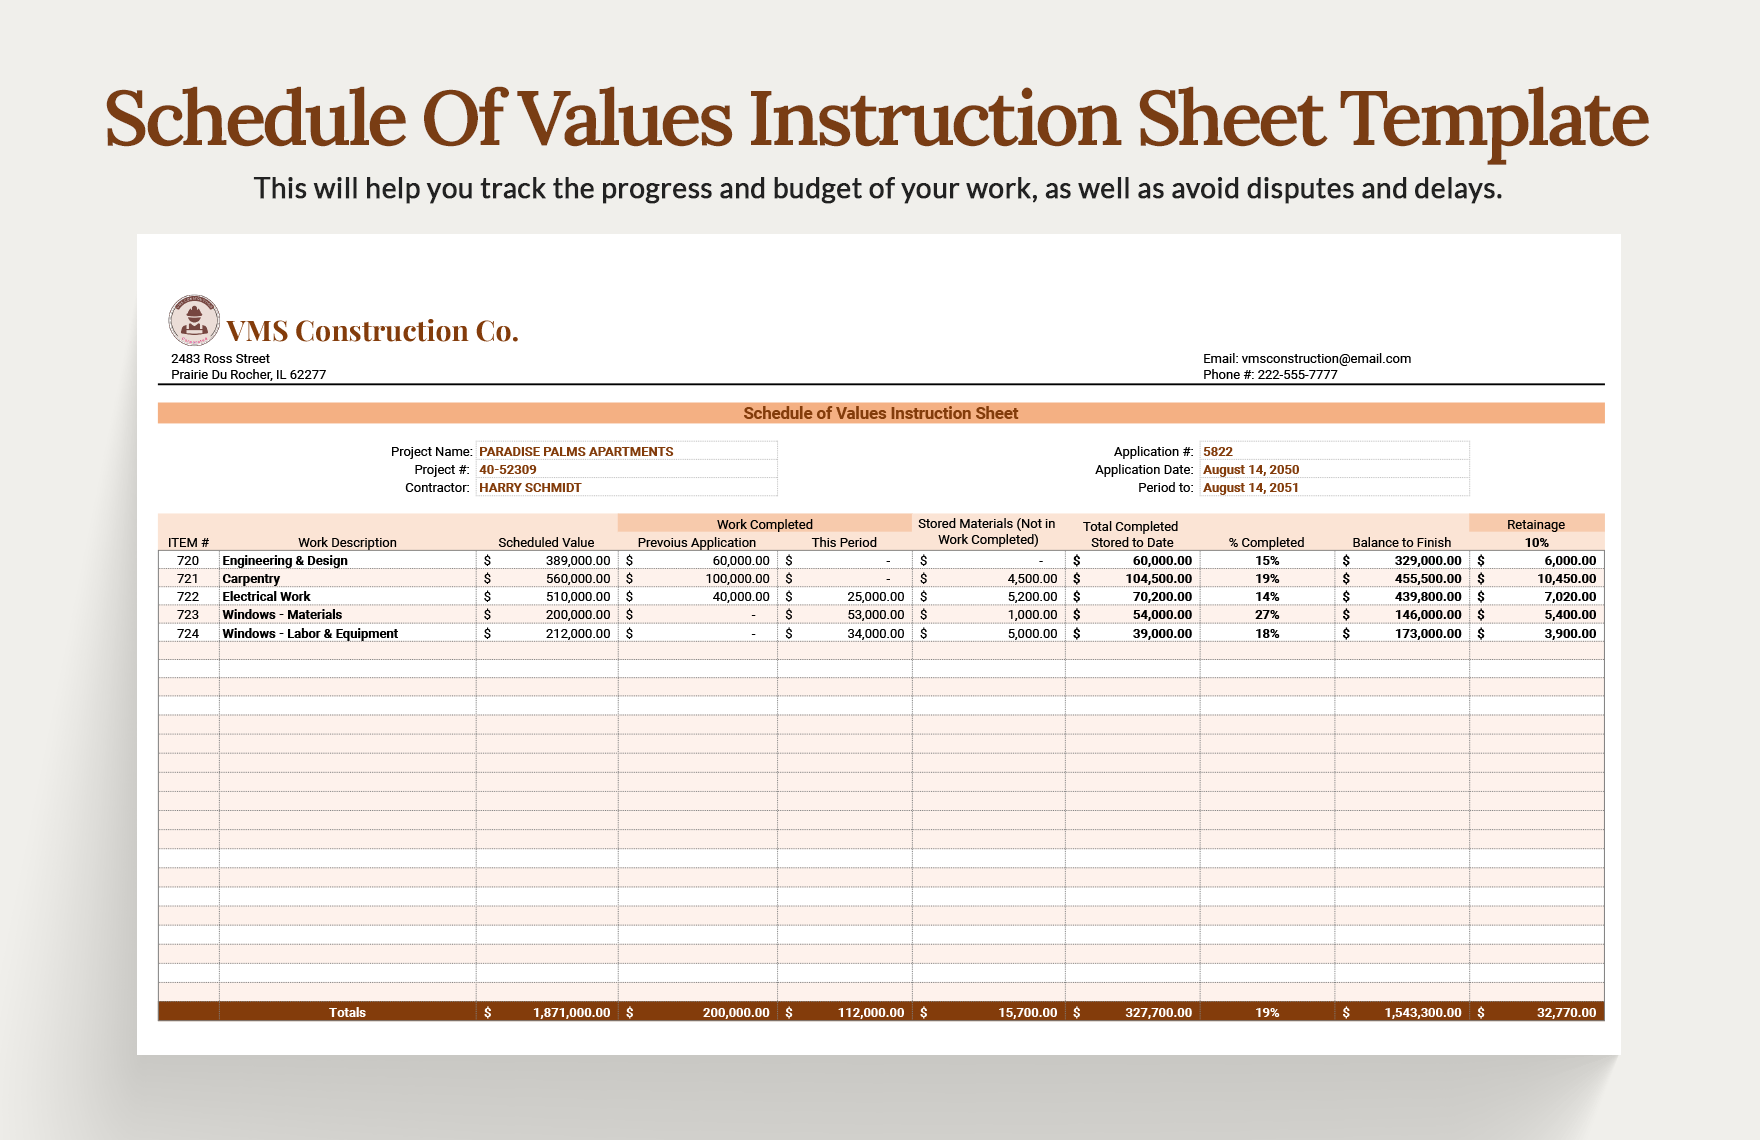 Schedule Of Values Instruction Sheet Template